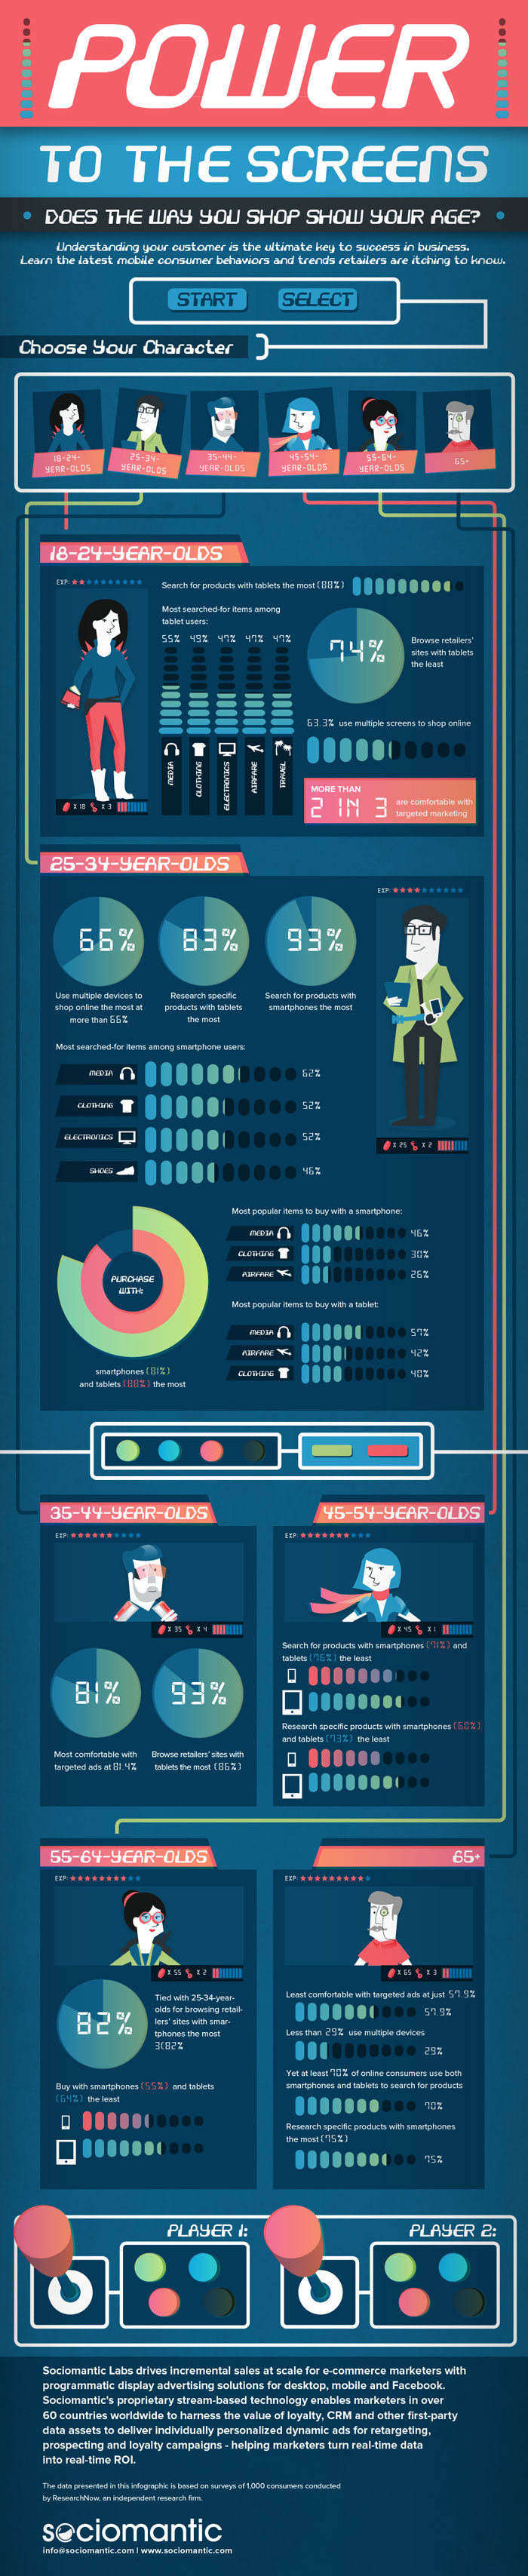 Infographie Sociomantic Power to the Screens